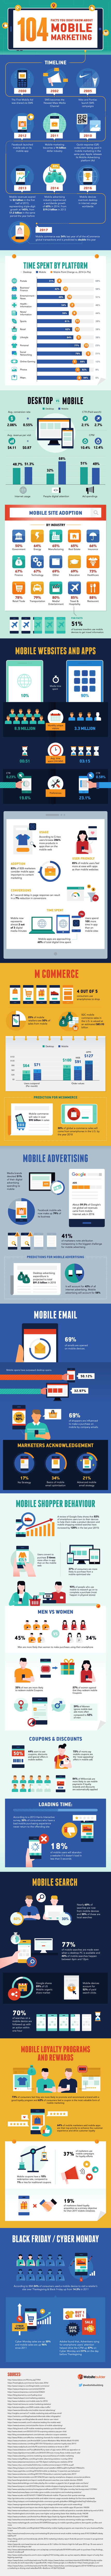 Mobile Marketing Facts Infographic